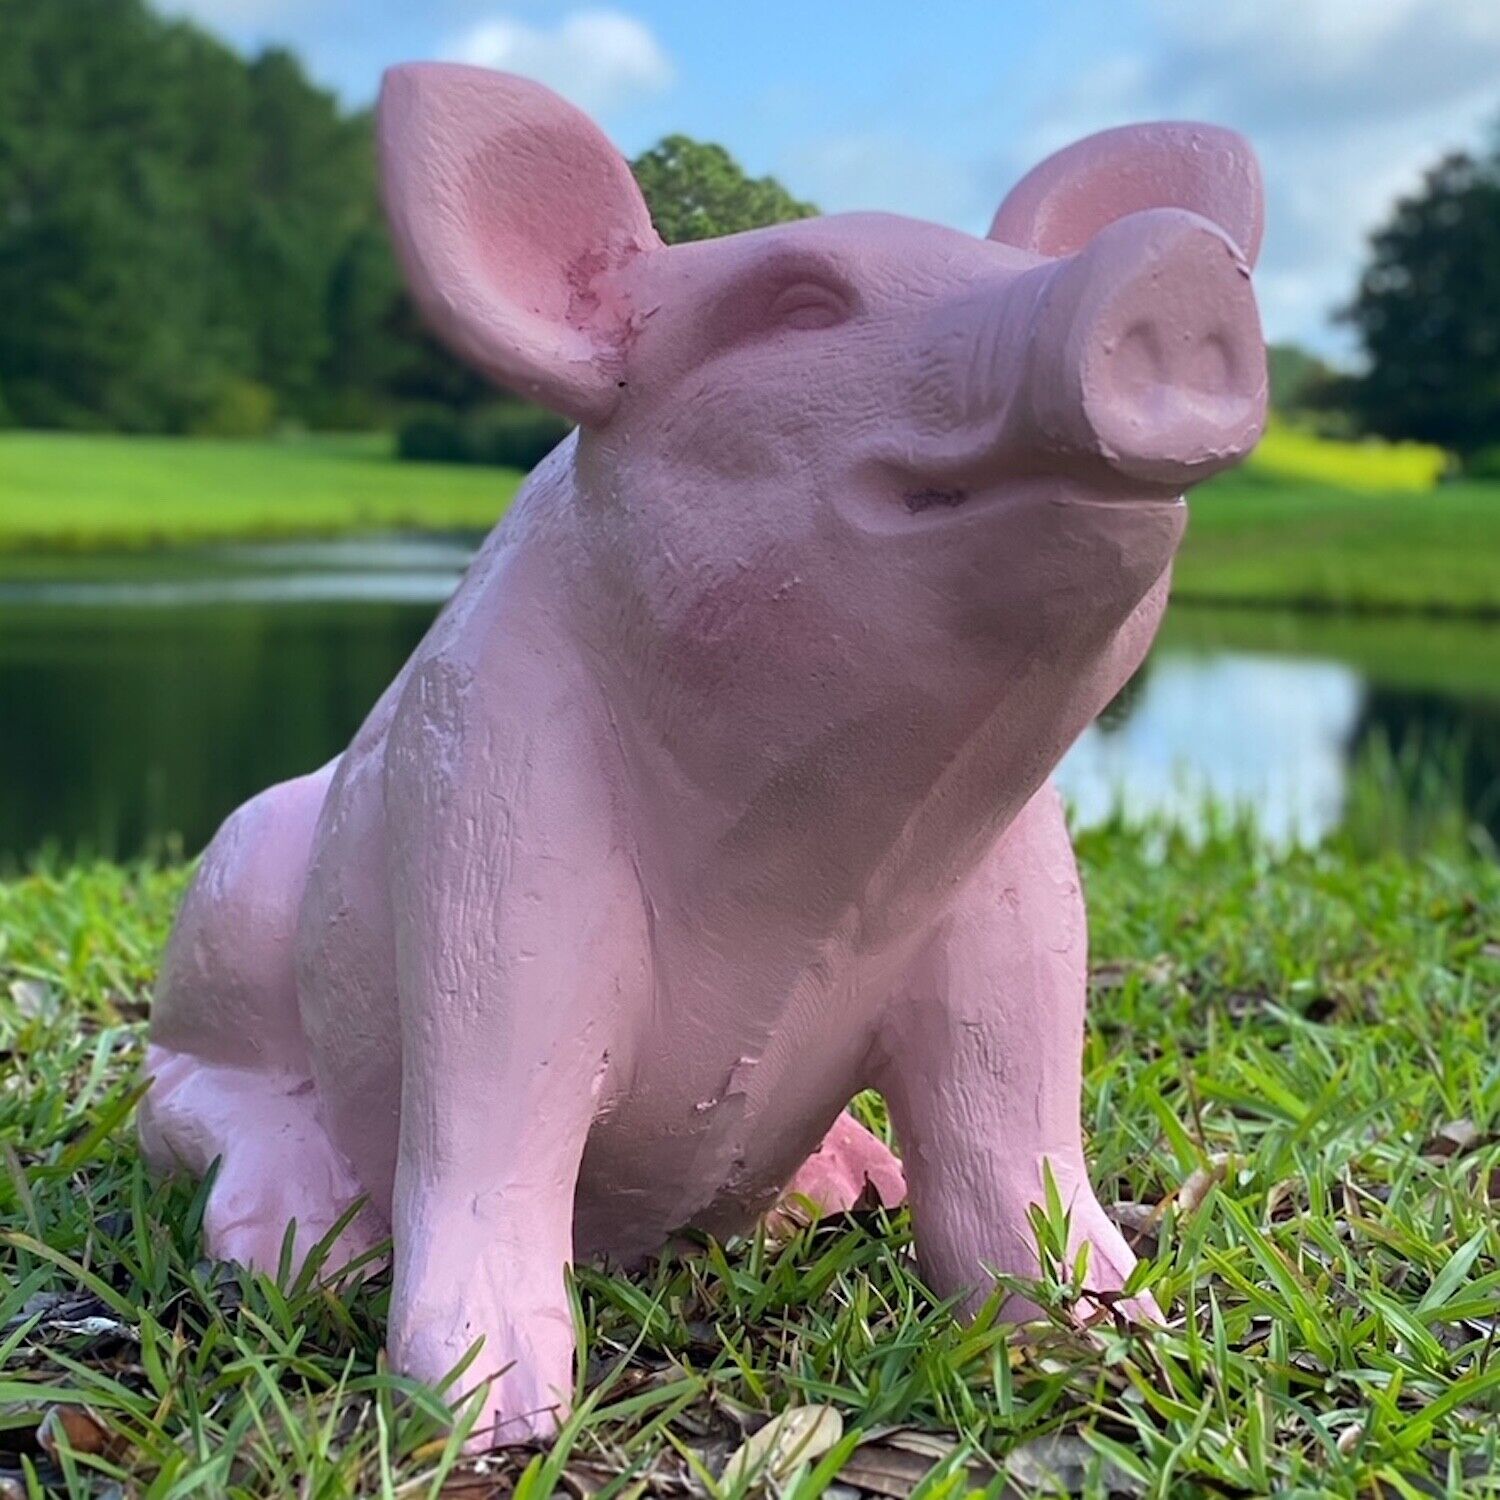 Cute Seated Pig Statue for Indoor or Outdoor Use Farm Animal Decor Wilbur